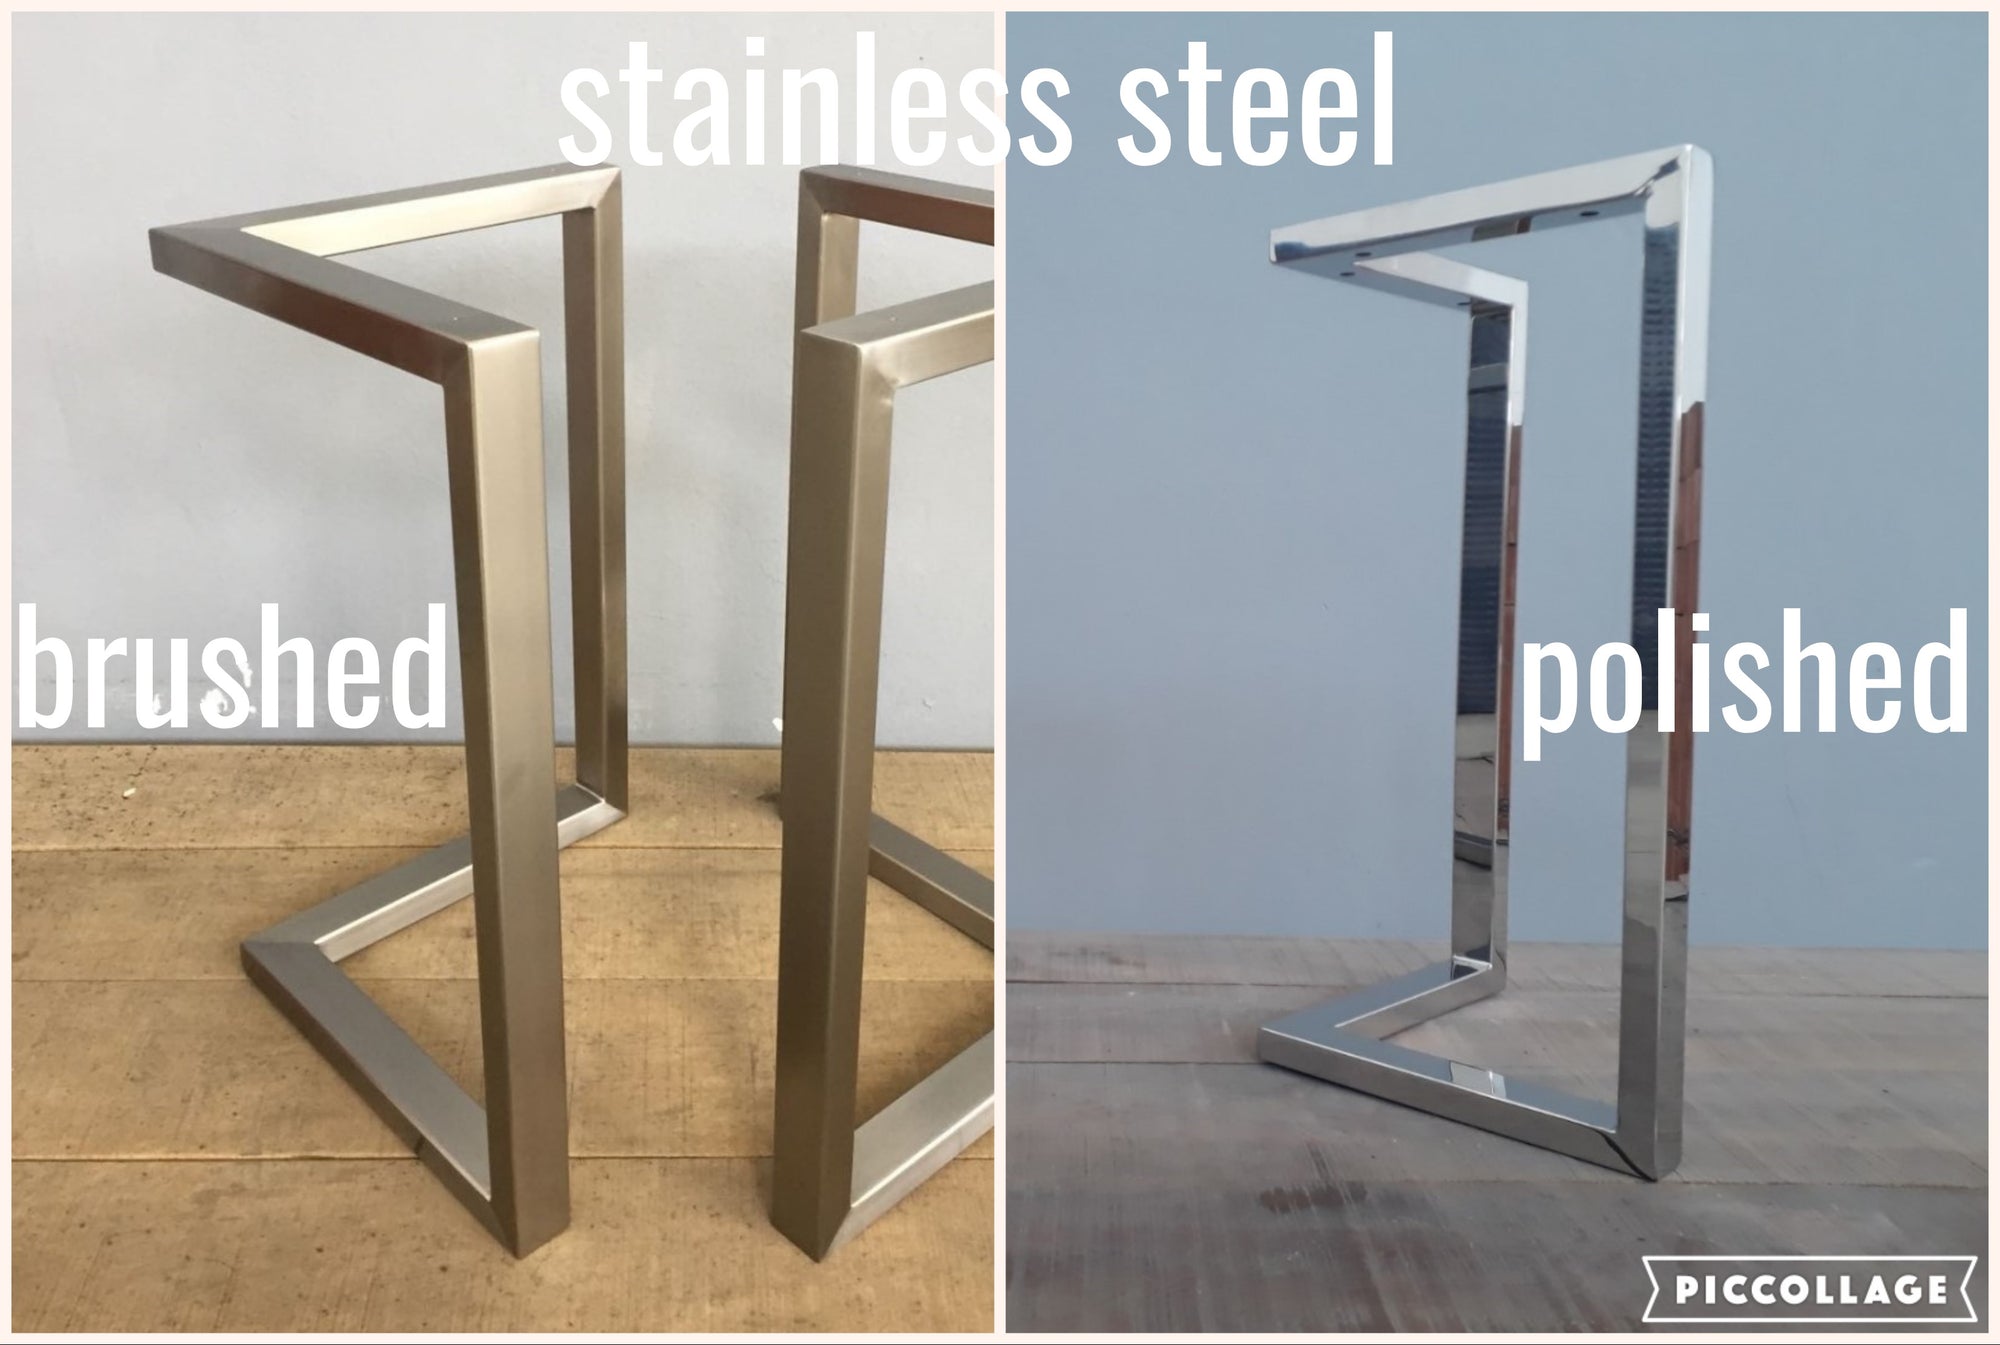 35" H X 24" W Bracket Stainless Steel Counter Height  Table Legs,  Height 33" - 40" Set(2)